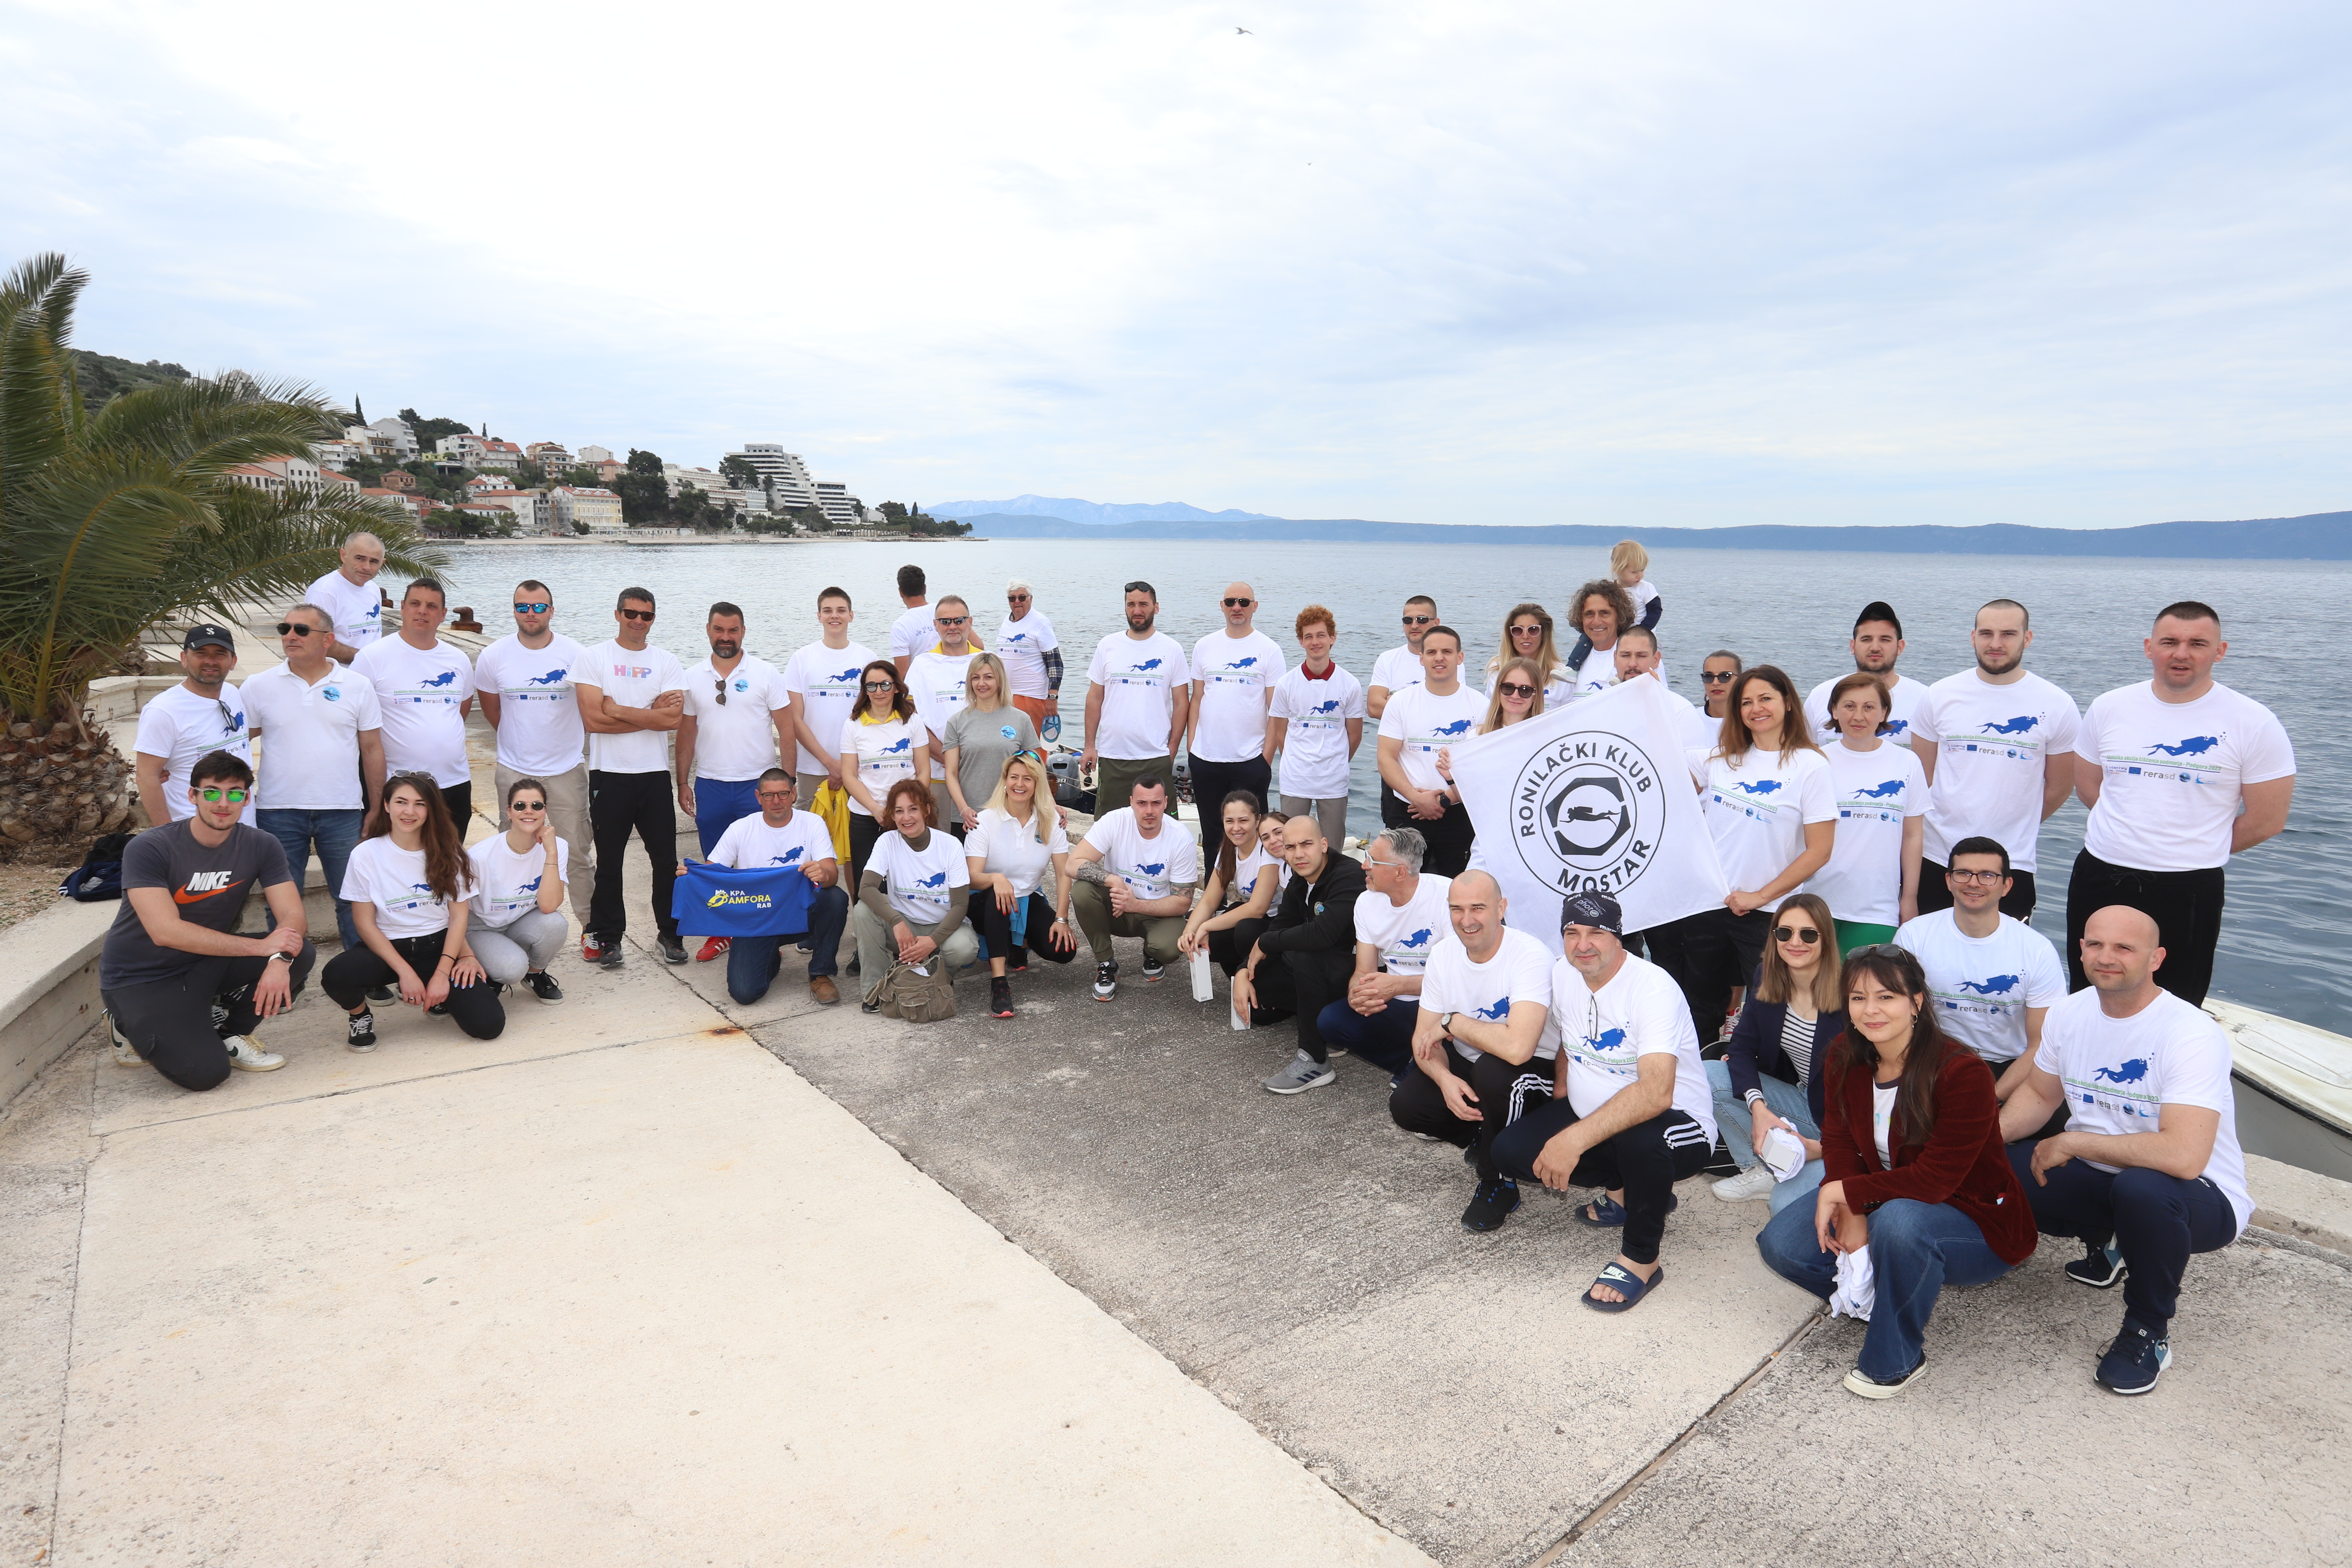 The eco-action of cleaning the beaches and underwater areas of the Makarska Riviera held last weekend